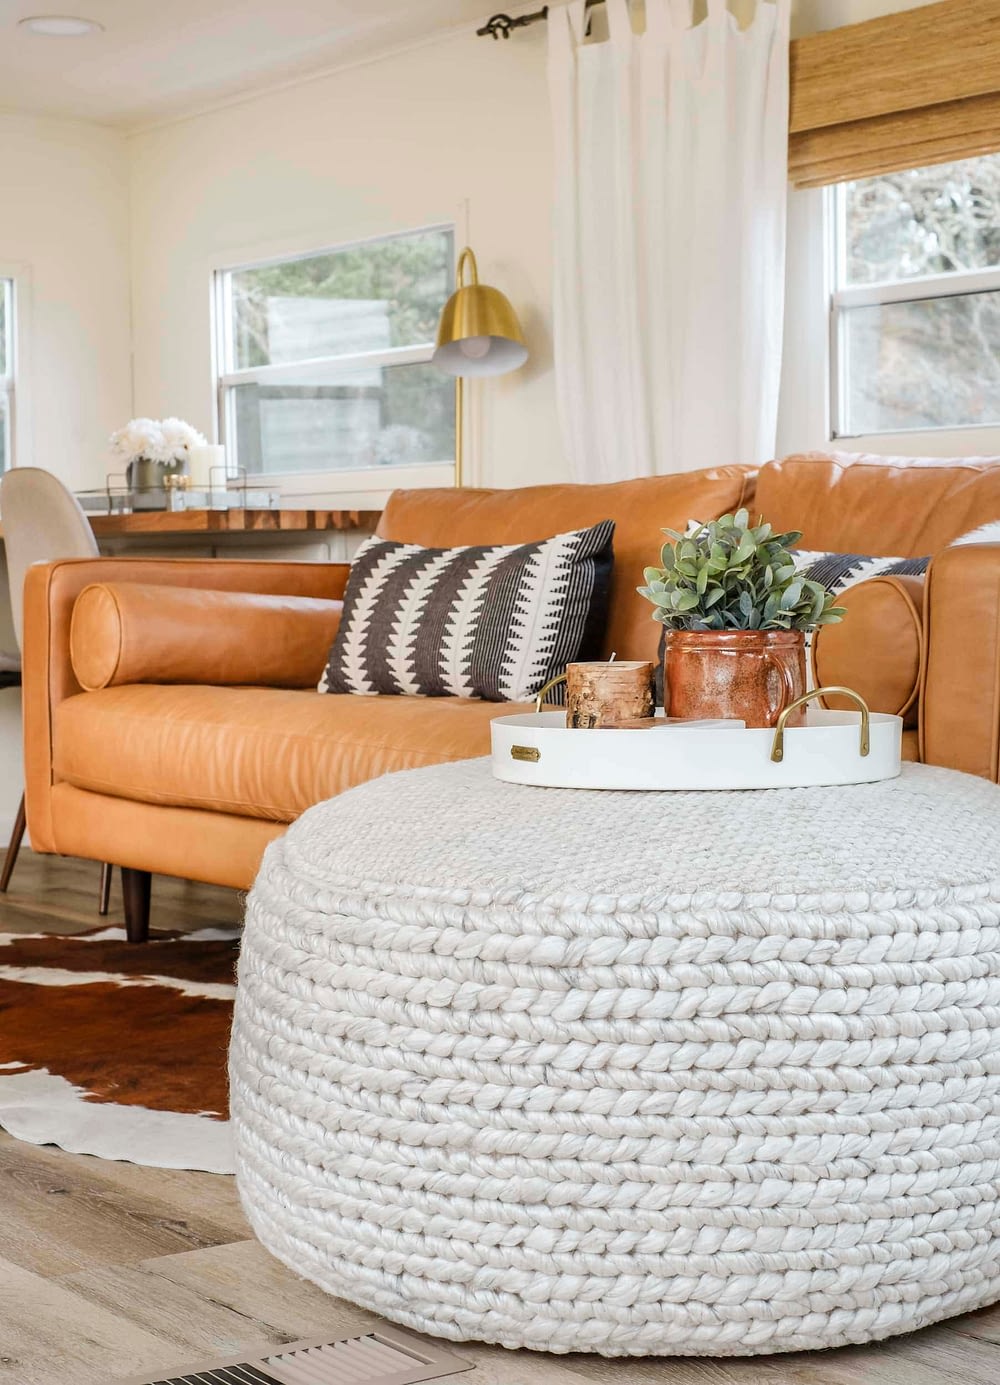 Large pouf with a tray on top in front of brown leather sofa